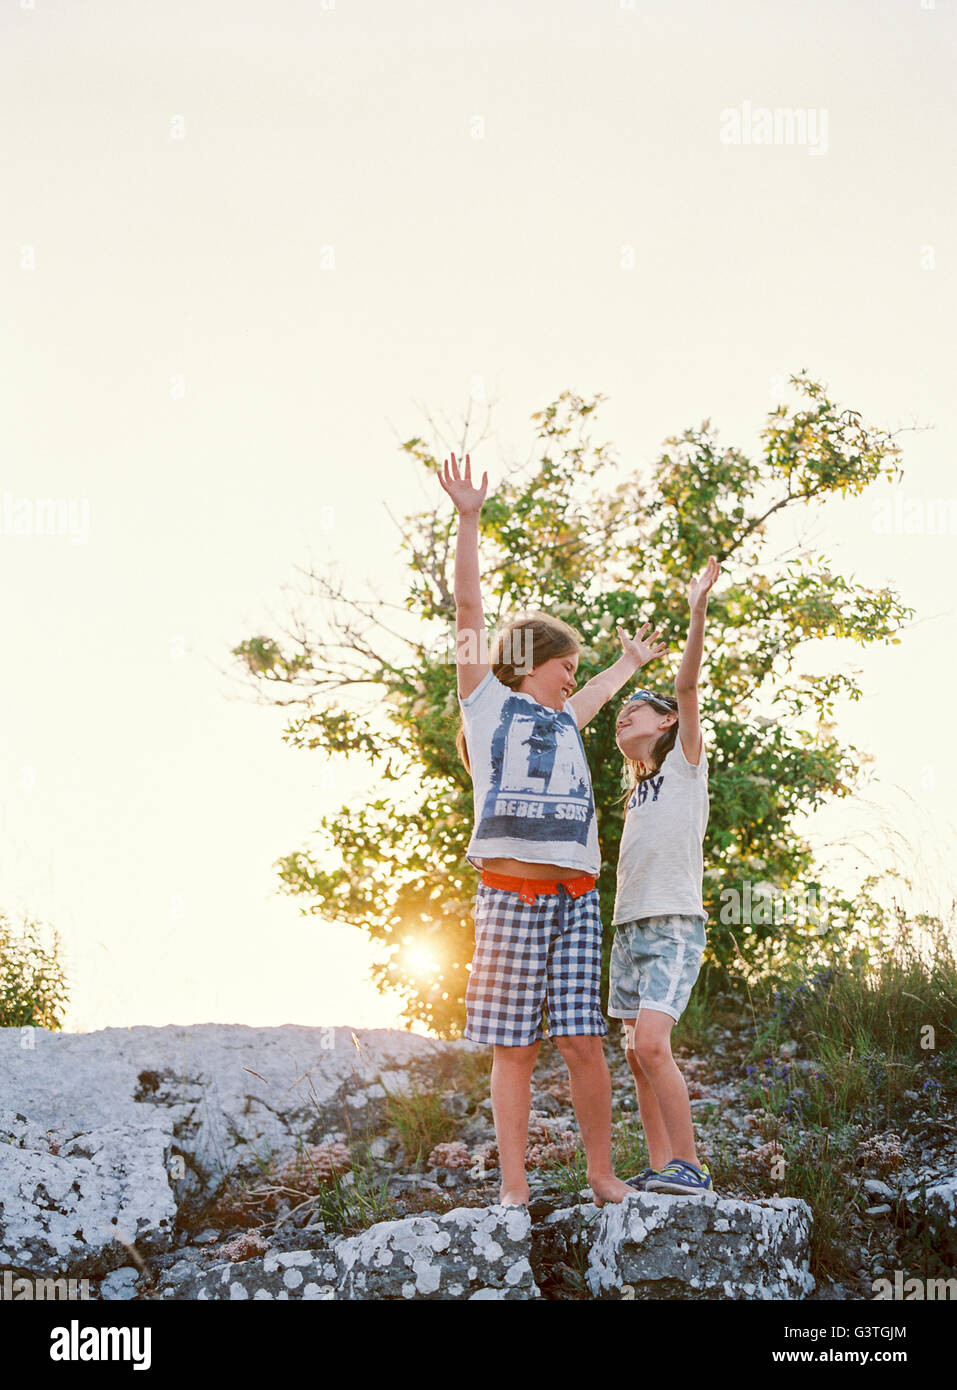 Sweden, Two boys (8-9, 10-11) standing on rock with hands up Stock Photo